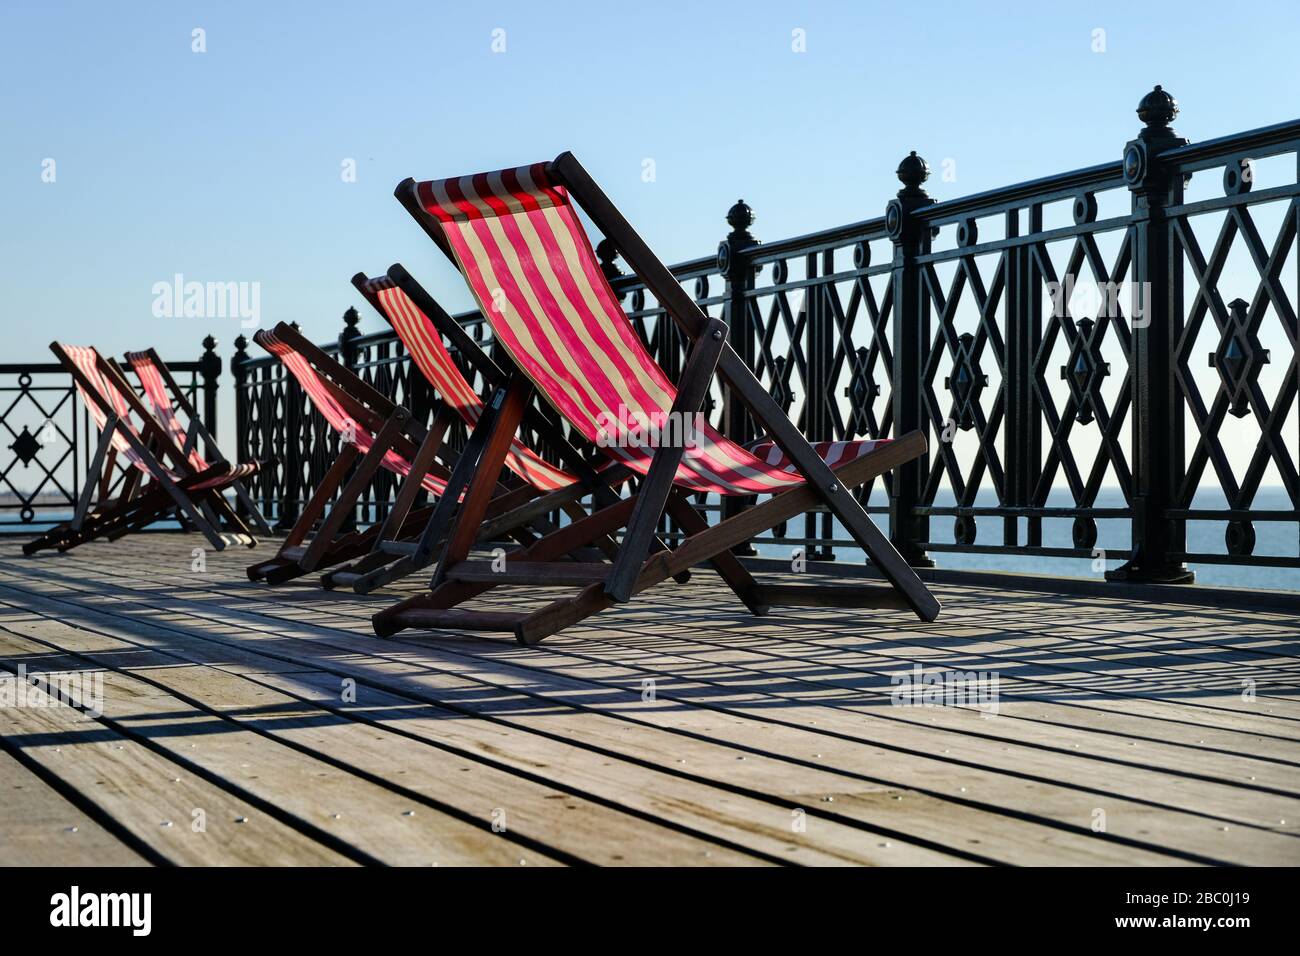 Deck chairs for visitors to relax and enjoy the view on Hastings Pier, East Sussex, UK Stock Photo